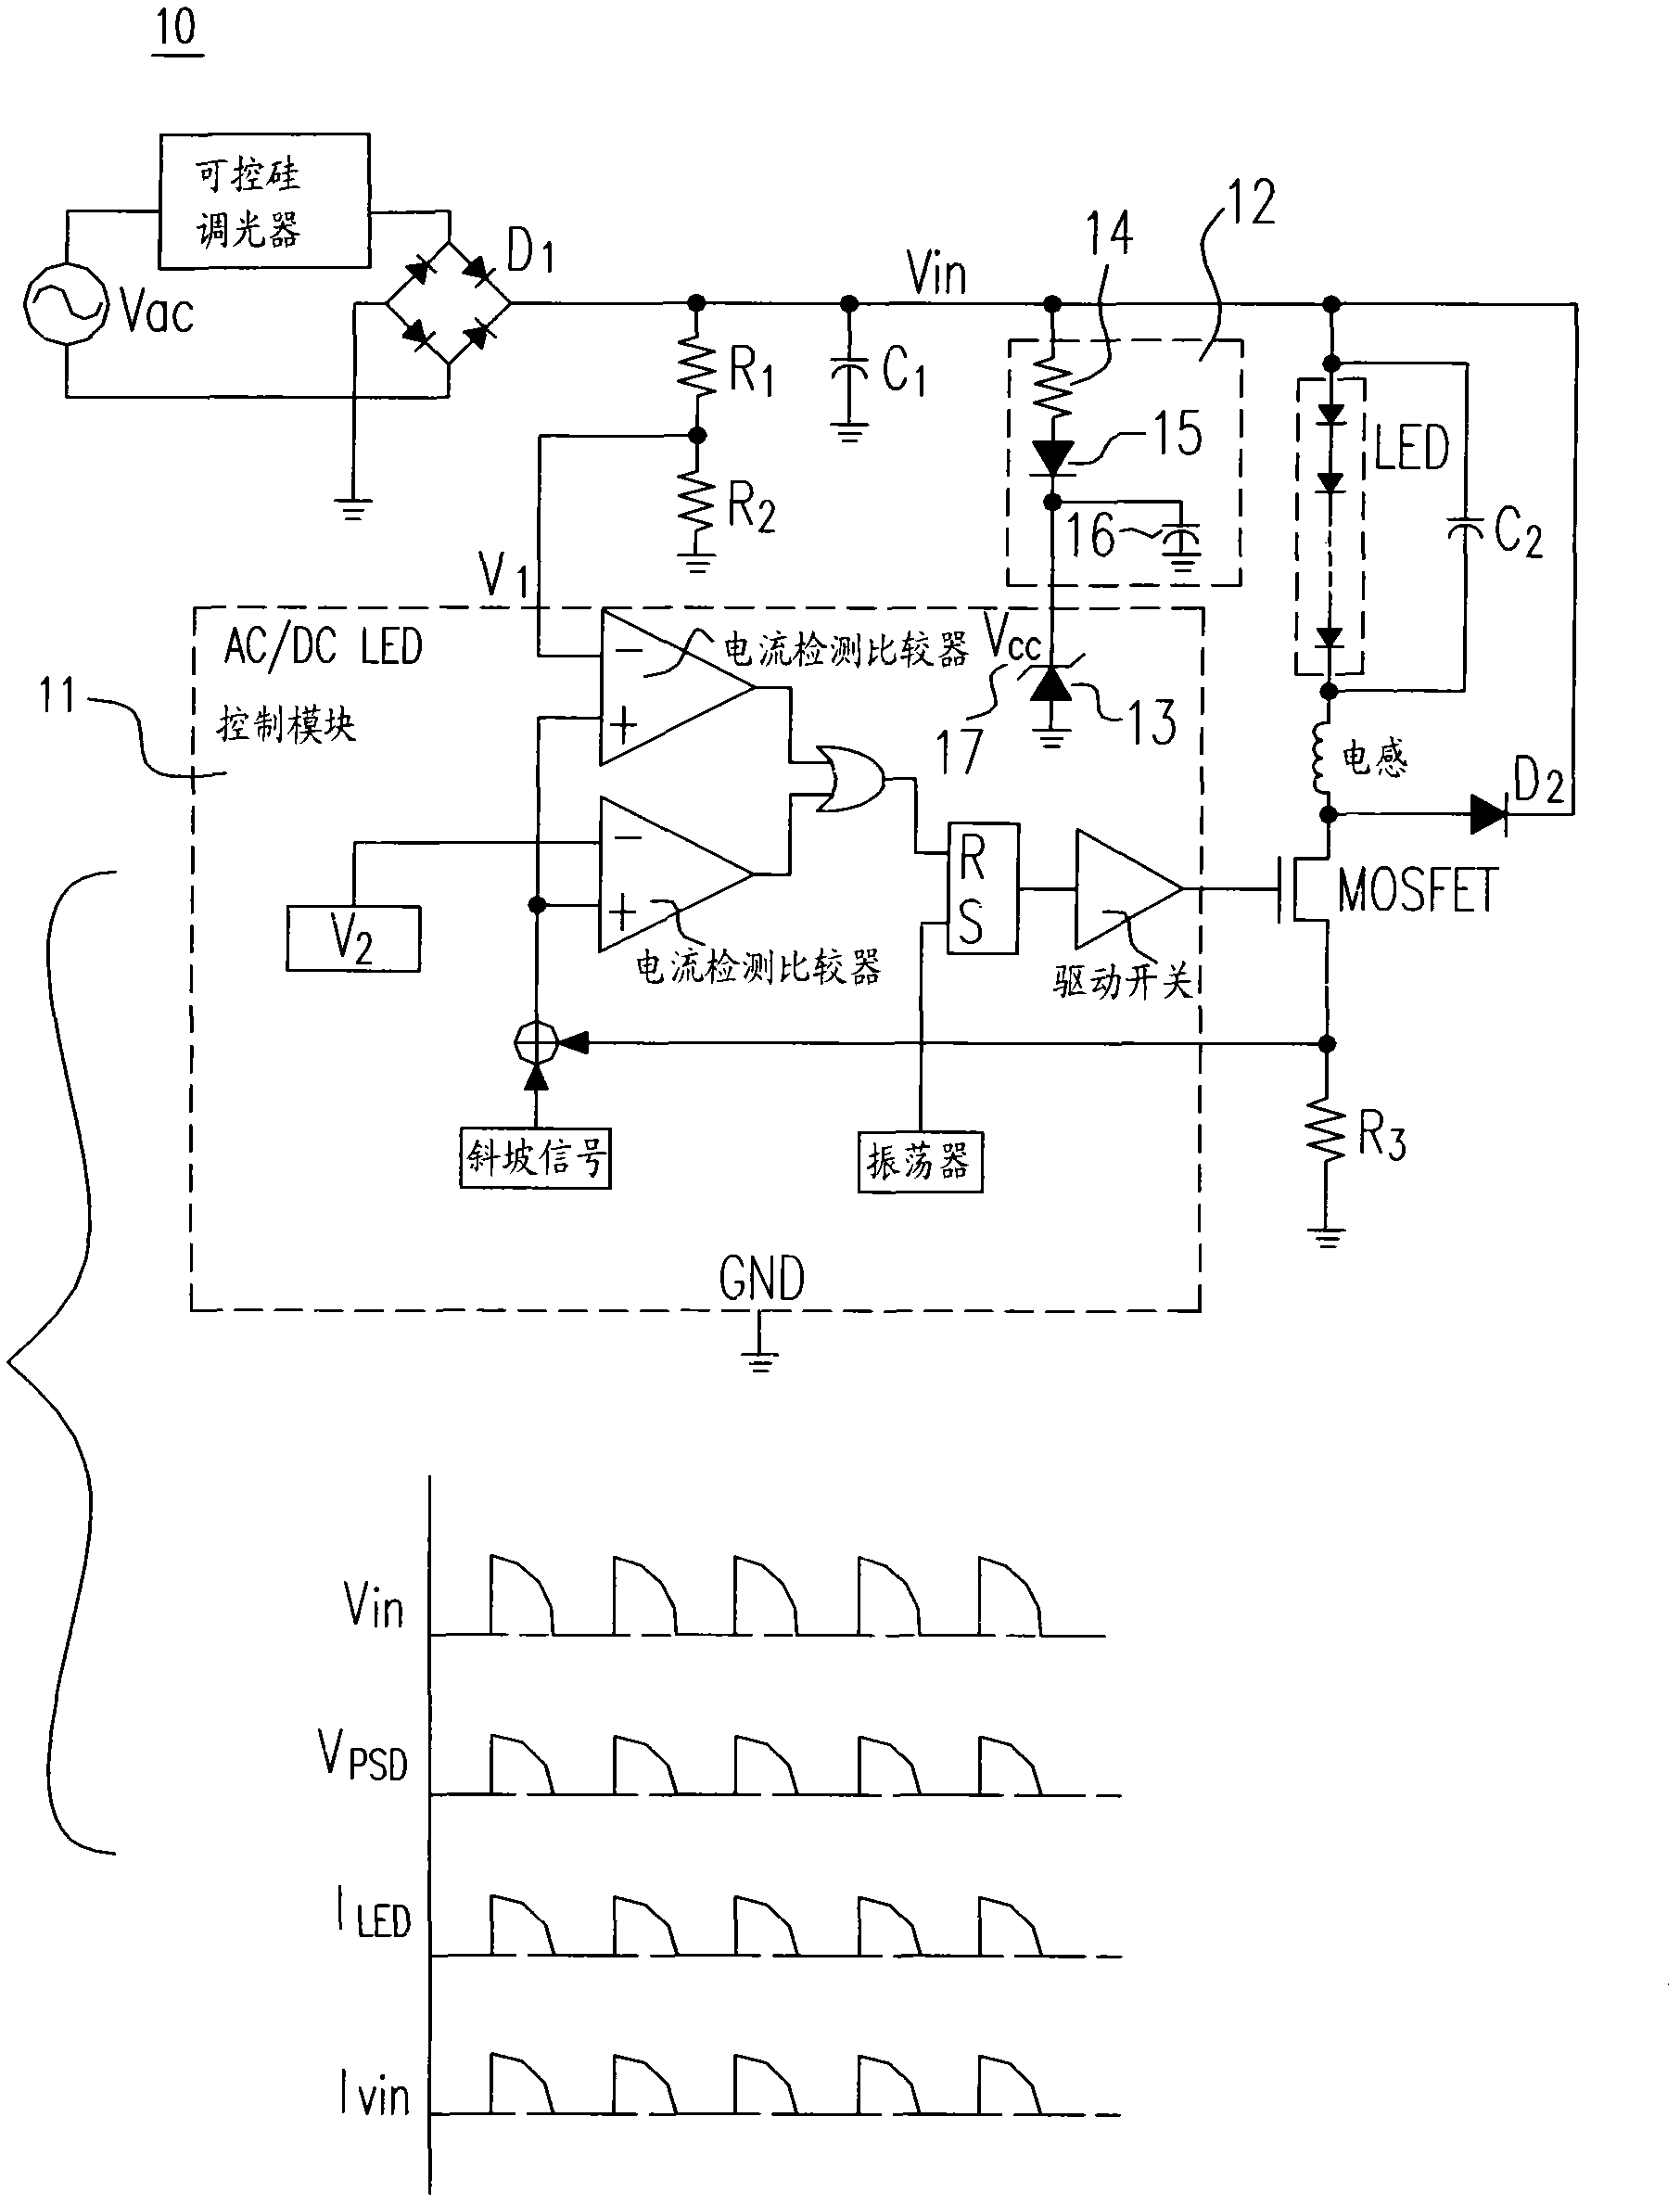 Driving circuit for LED